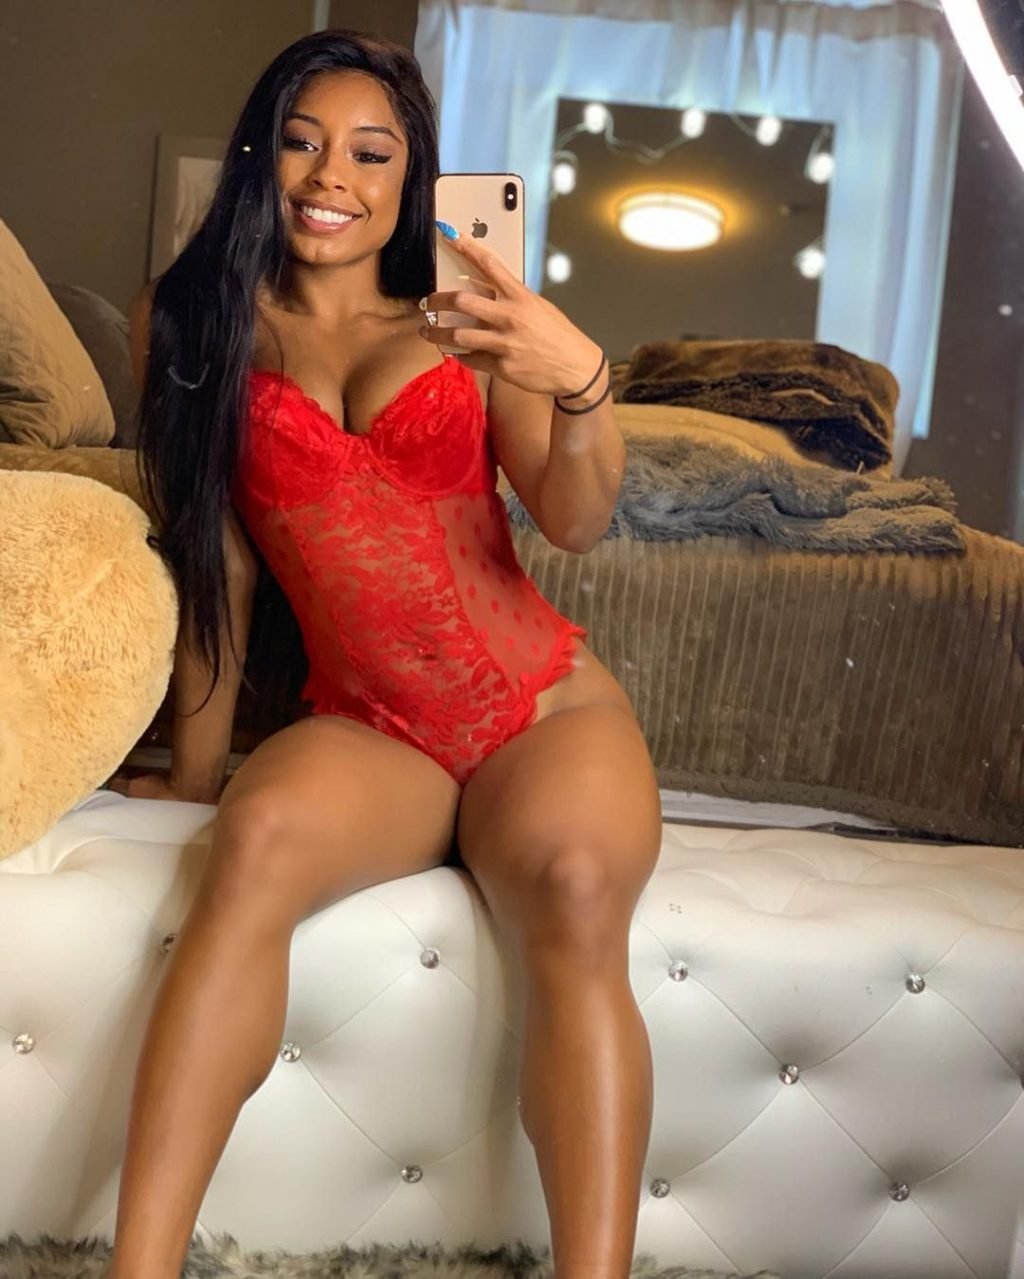 Check out more Qimmah Russo’s hot photos from Instagram (January-March 2019...